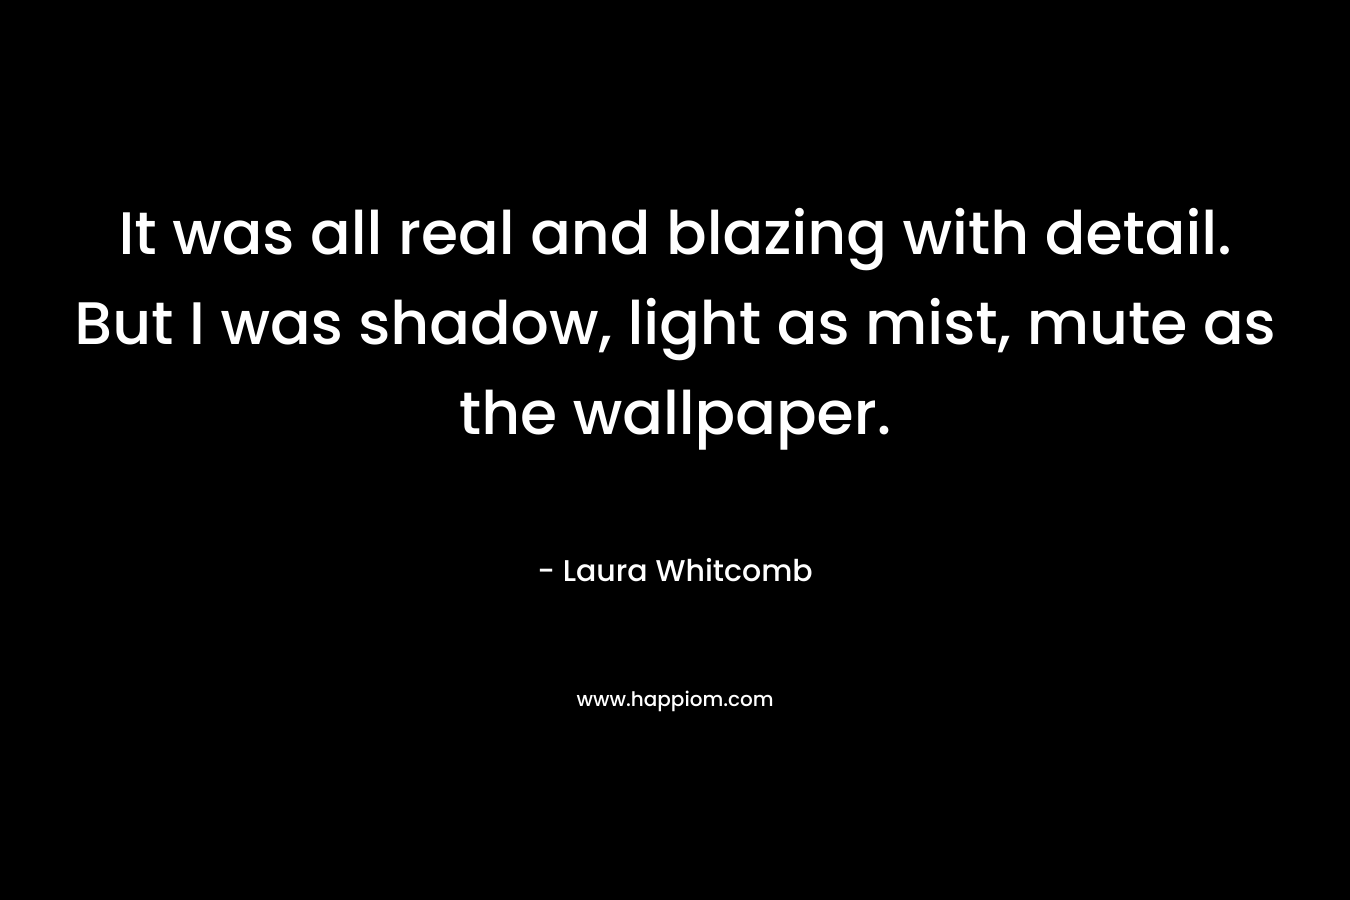 It was all real and blazing with detail. But I was shadow, light as mist, mute as the wallpaper. – Laura Whitcomb